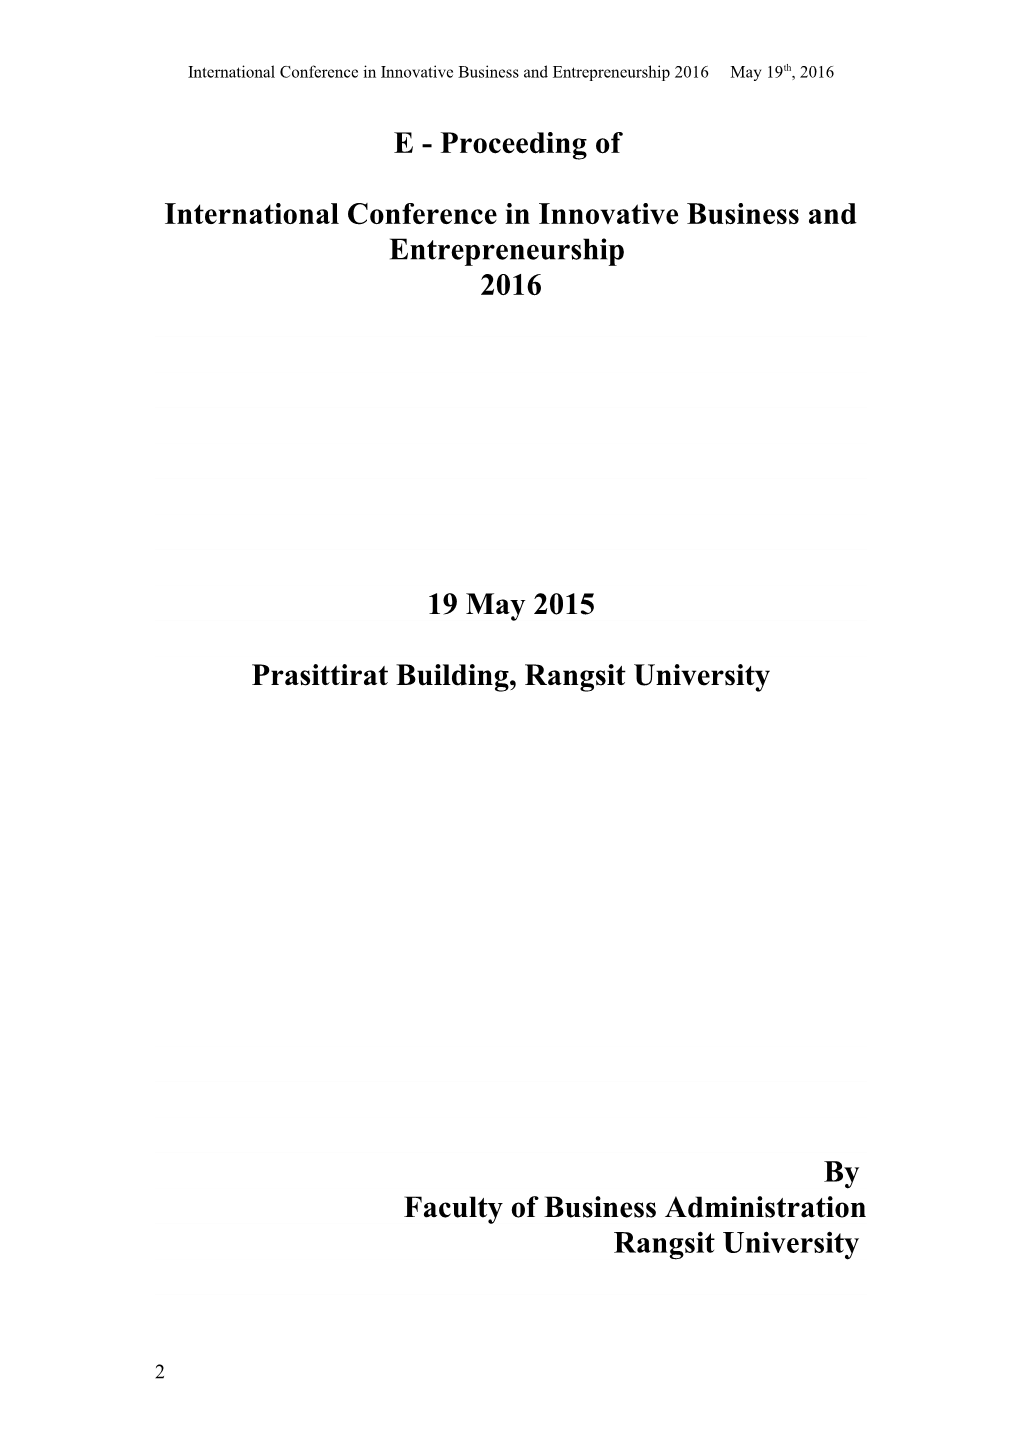 International Conference in Innovative Business and Entrepreneurship